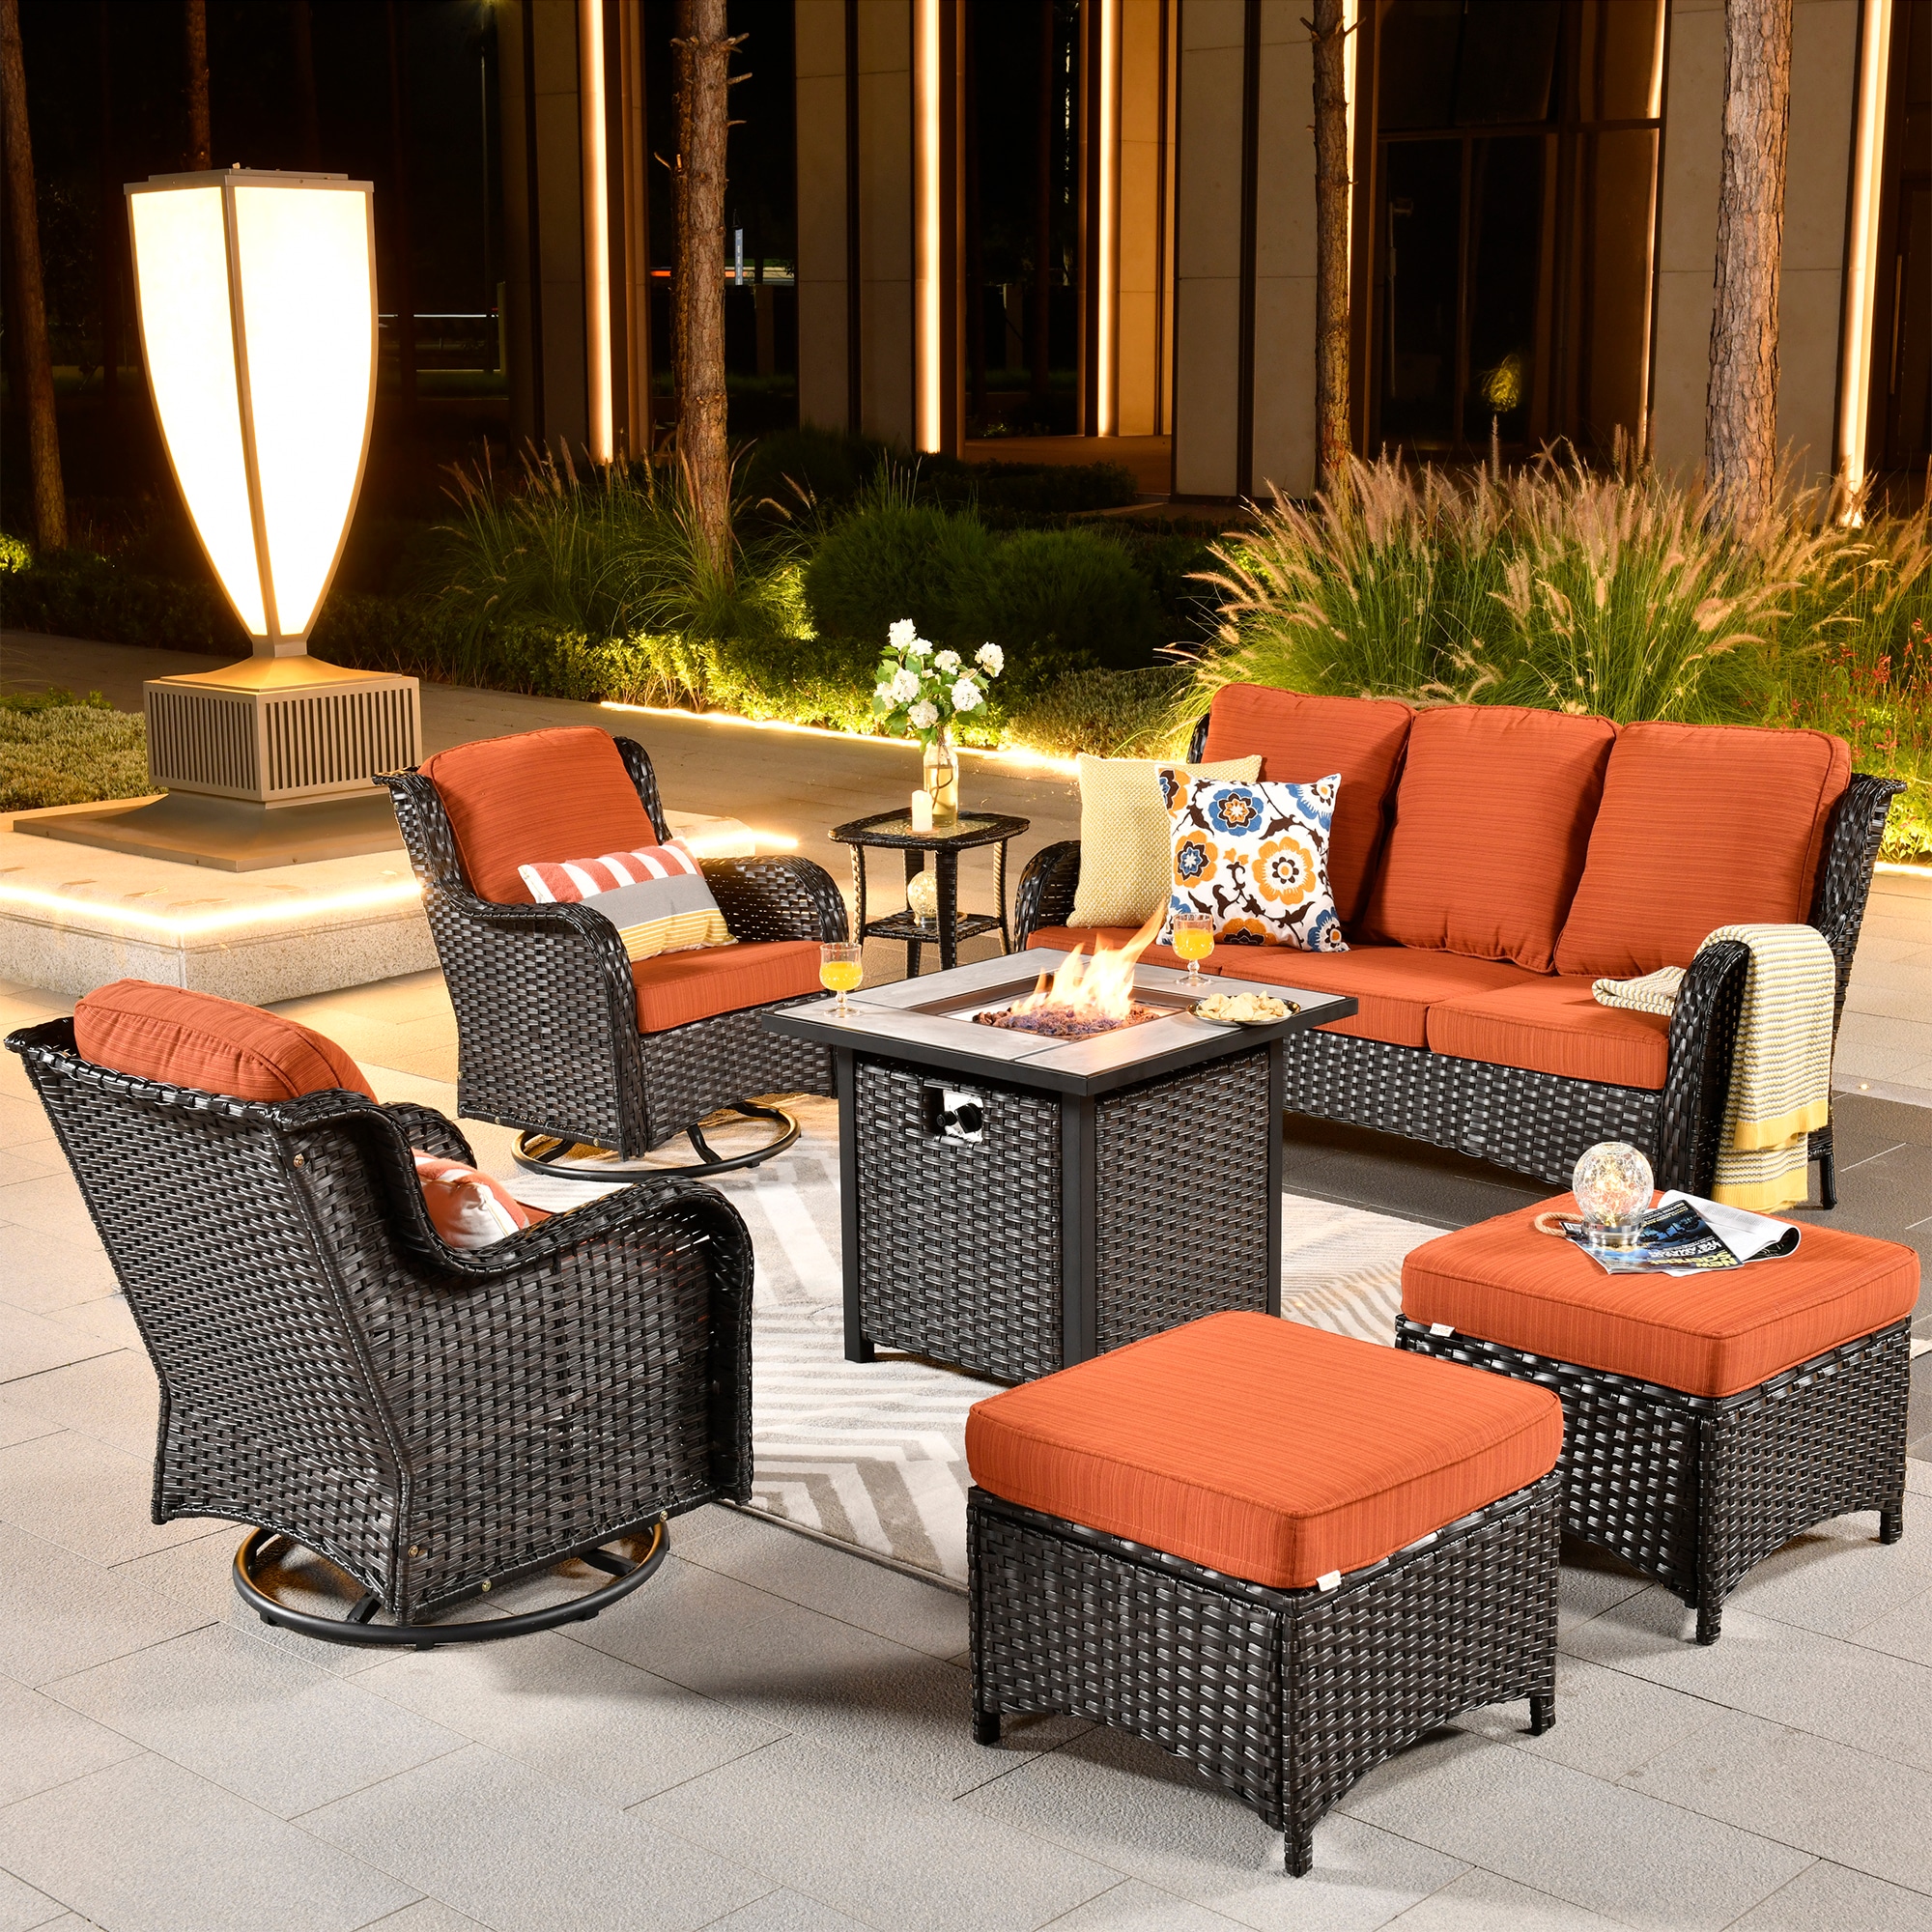 Backyard Diensday Outdoor Furniture 4-Piece Conversation Set All Weather Brown Wicker Deep Seating with Beige Water-Resistant Olefin Cushions & Sophisticated Glass Coffee Table Pool Patio Porch 